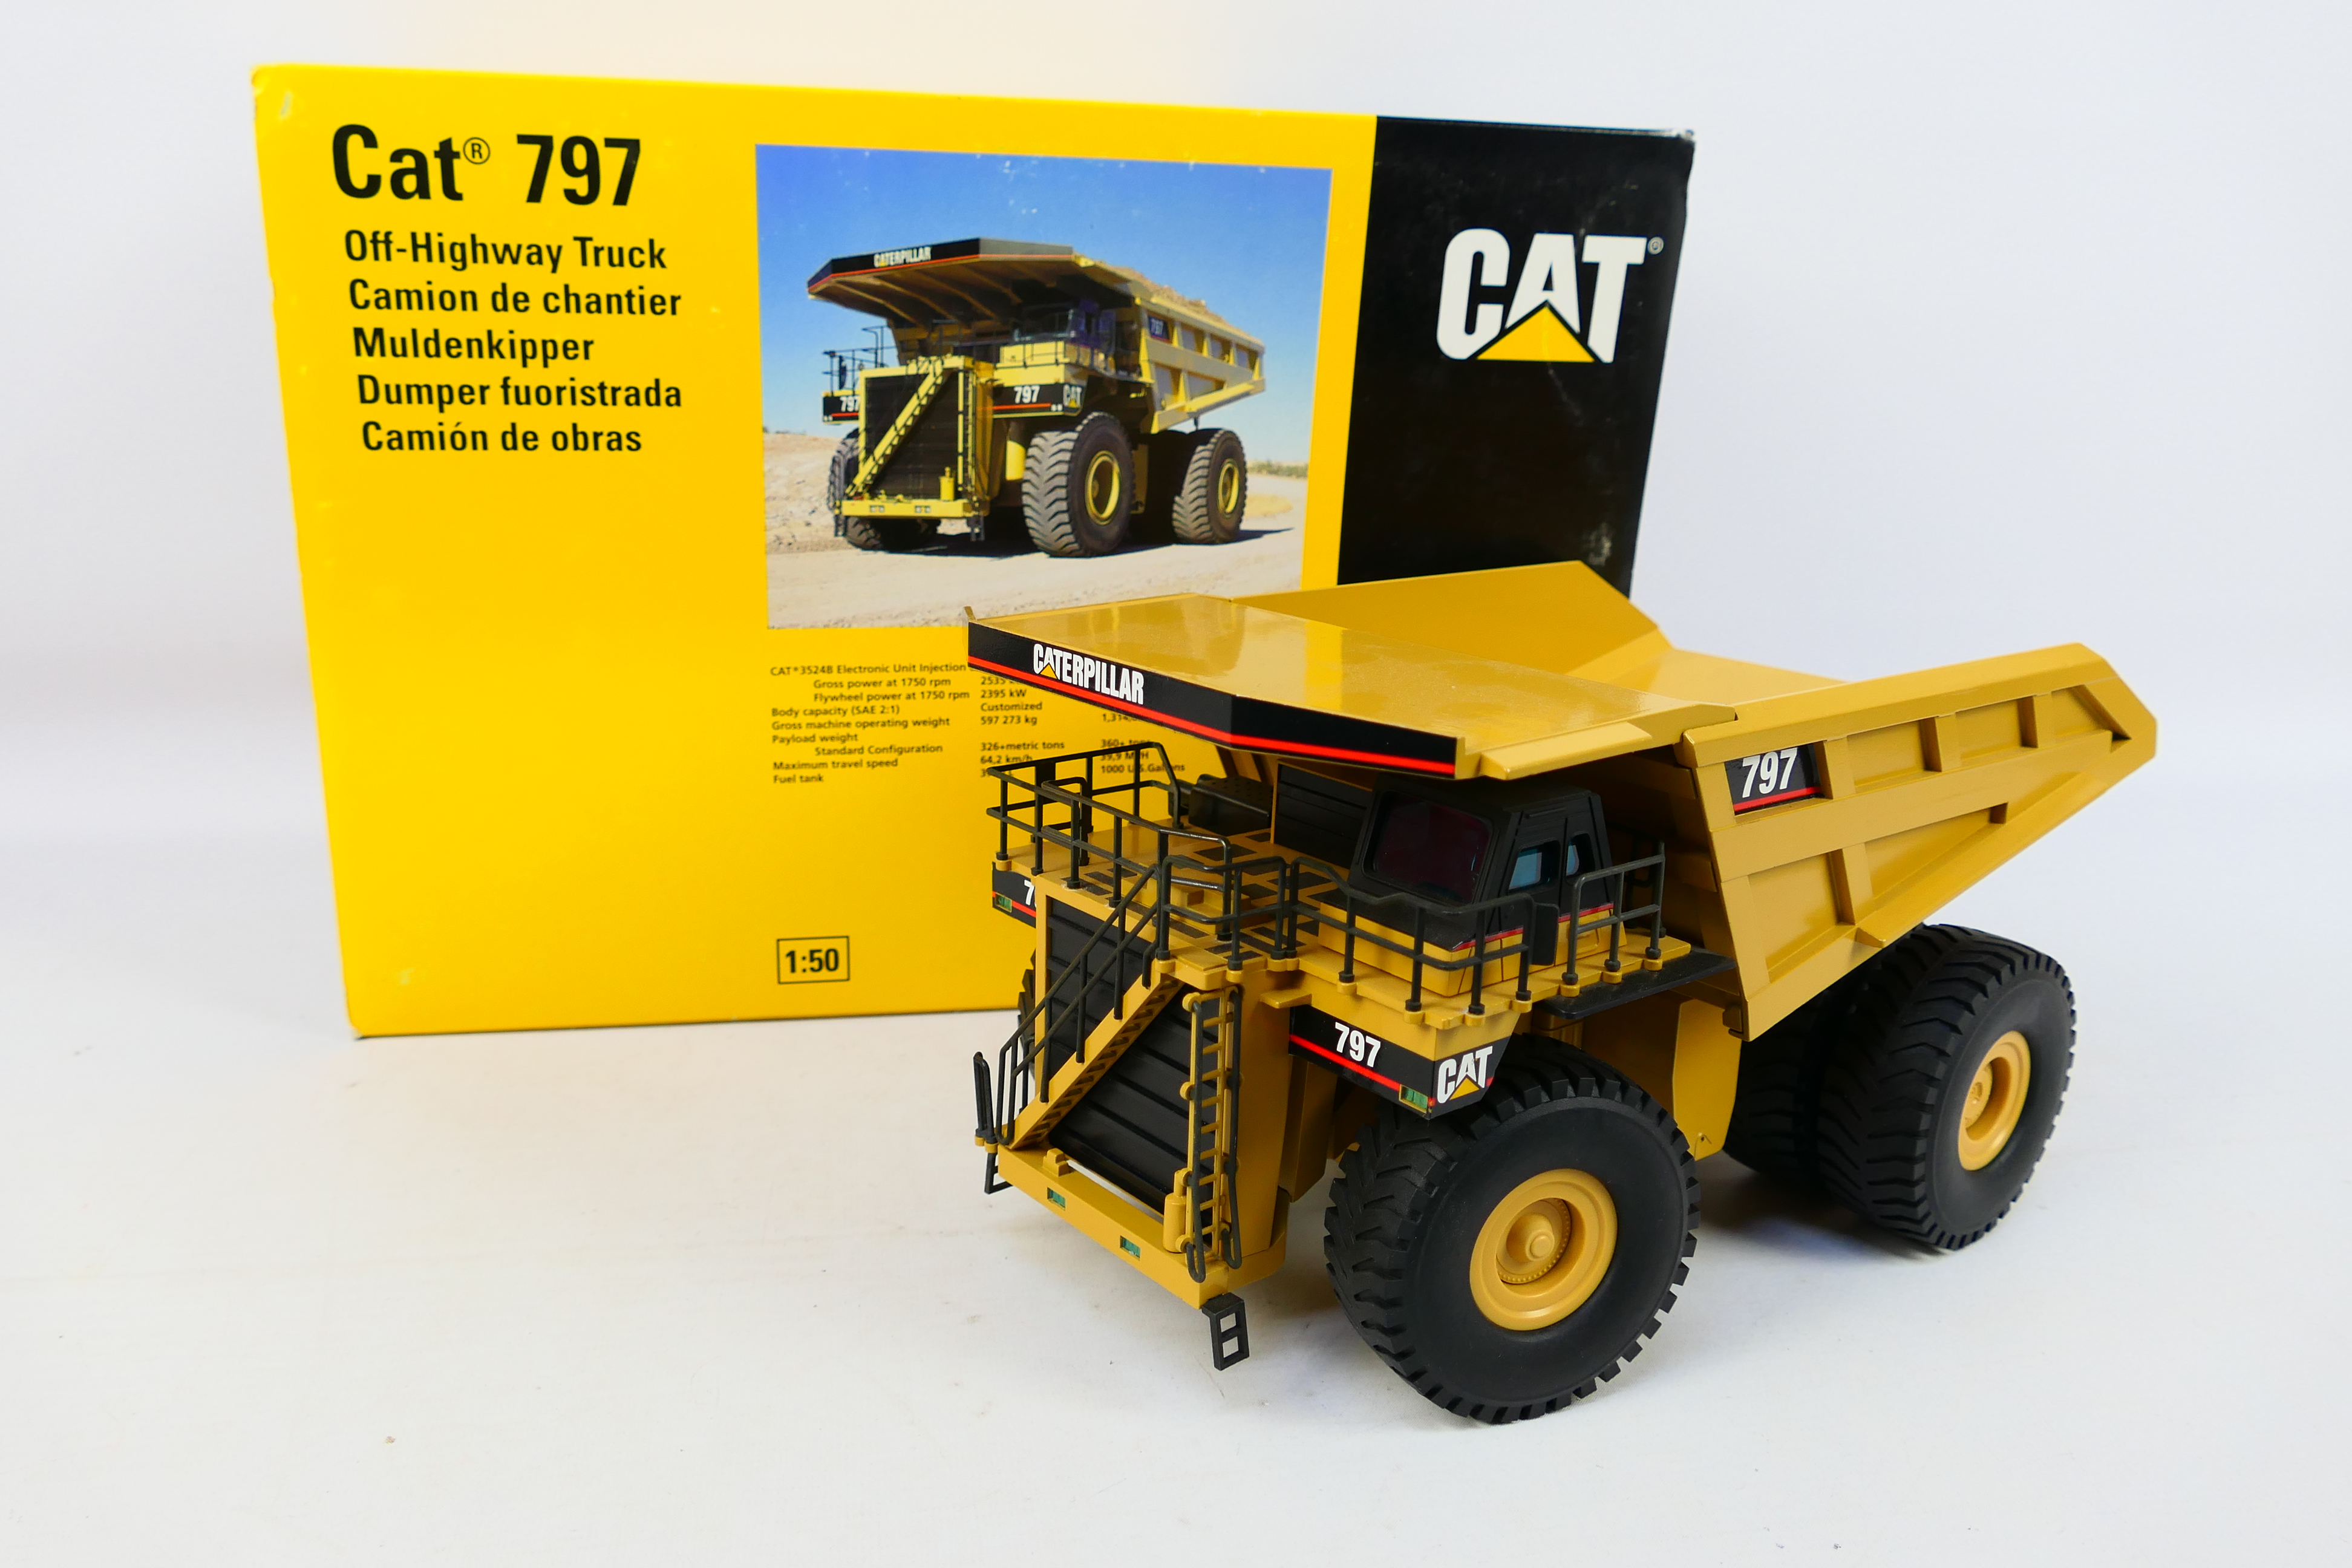 NZG - A 1:50 scale CAT 797 off highway dump truck from 2001 # 466.